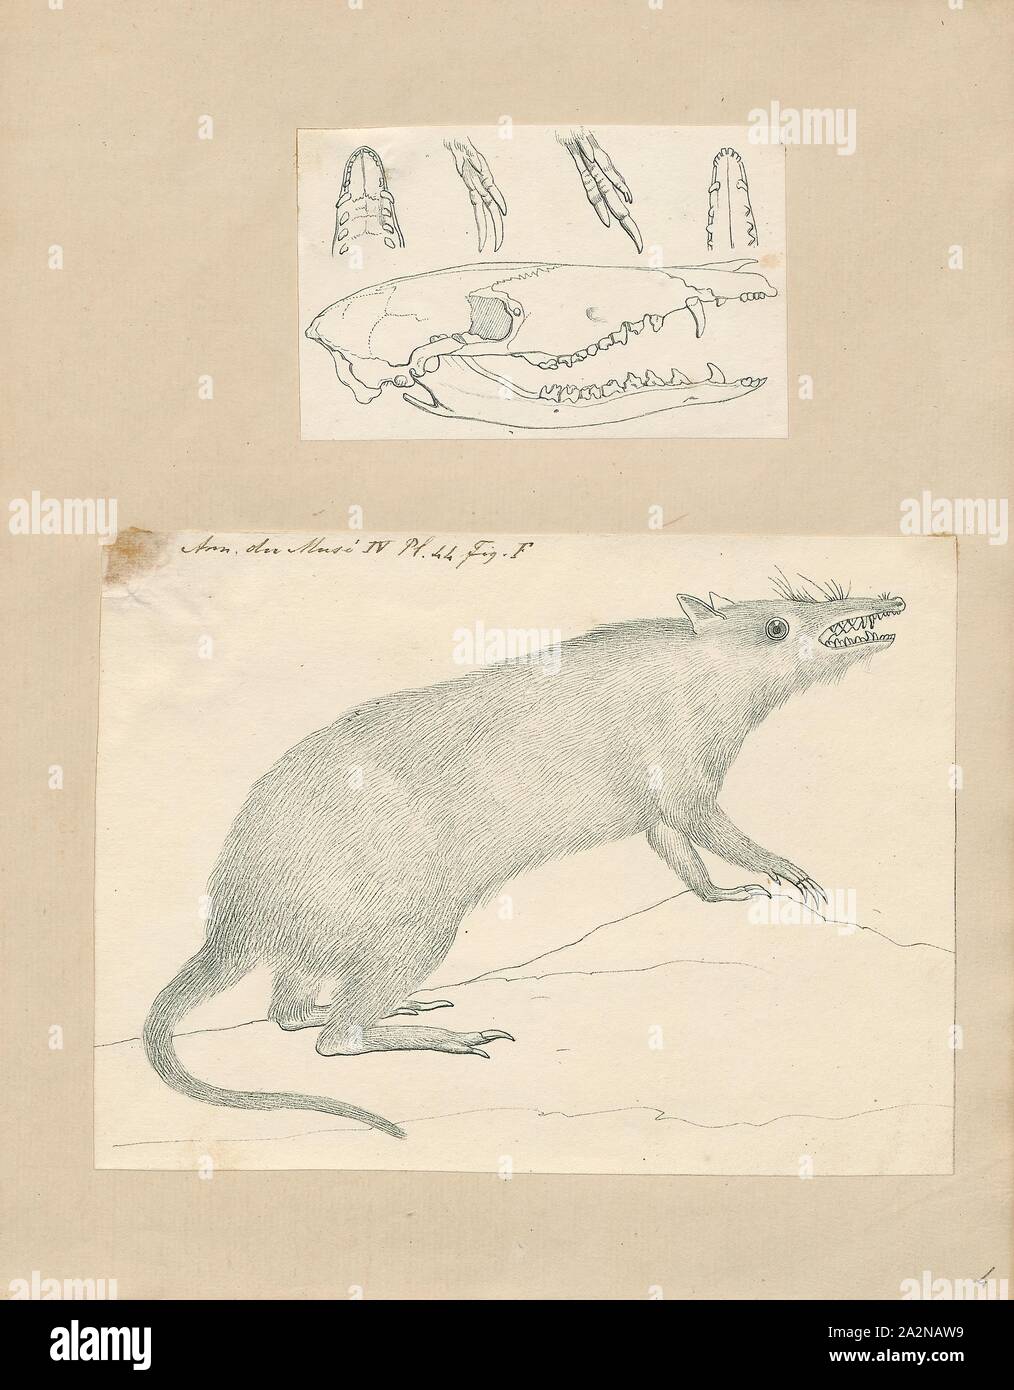 Perameles nasuta, Print, The long-nosed bandicoot (Perameles nasuta) is a species of bandicoot found in eastern Australia, from north Queensland along the east coast to Victoria. Around 40 centimetres (16 in) long, it is sandy- or grey-brown with a long snouty nose. Omnivorous, it forages for invertebrates, fungi and plants at night., 1700-1880 Stock Photo